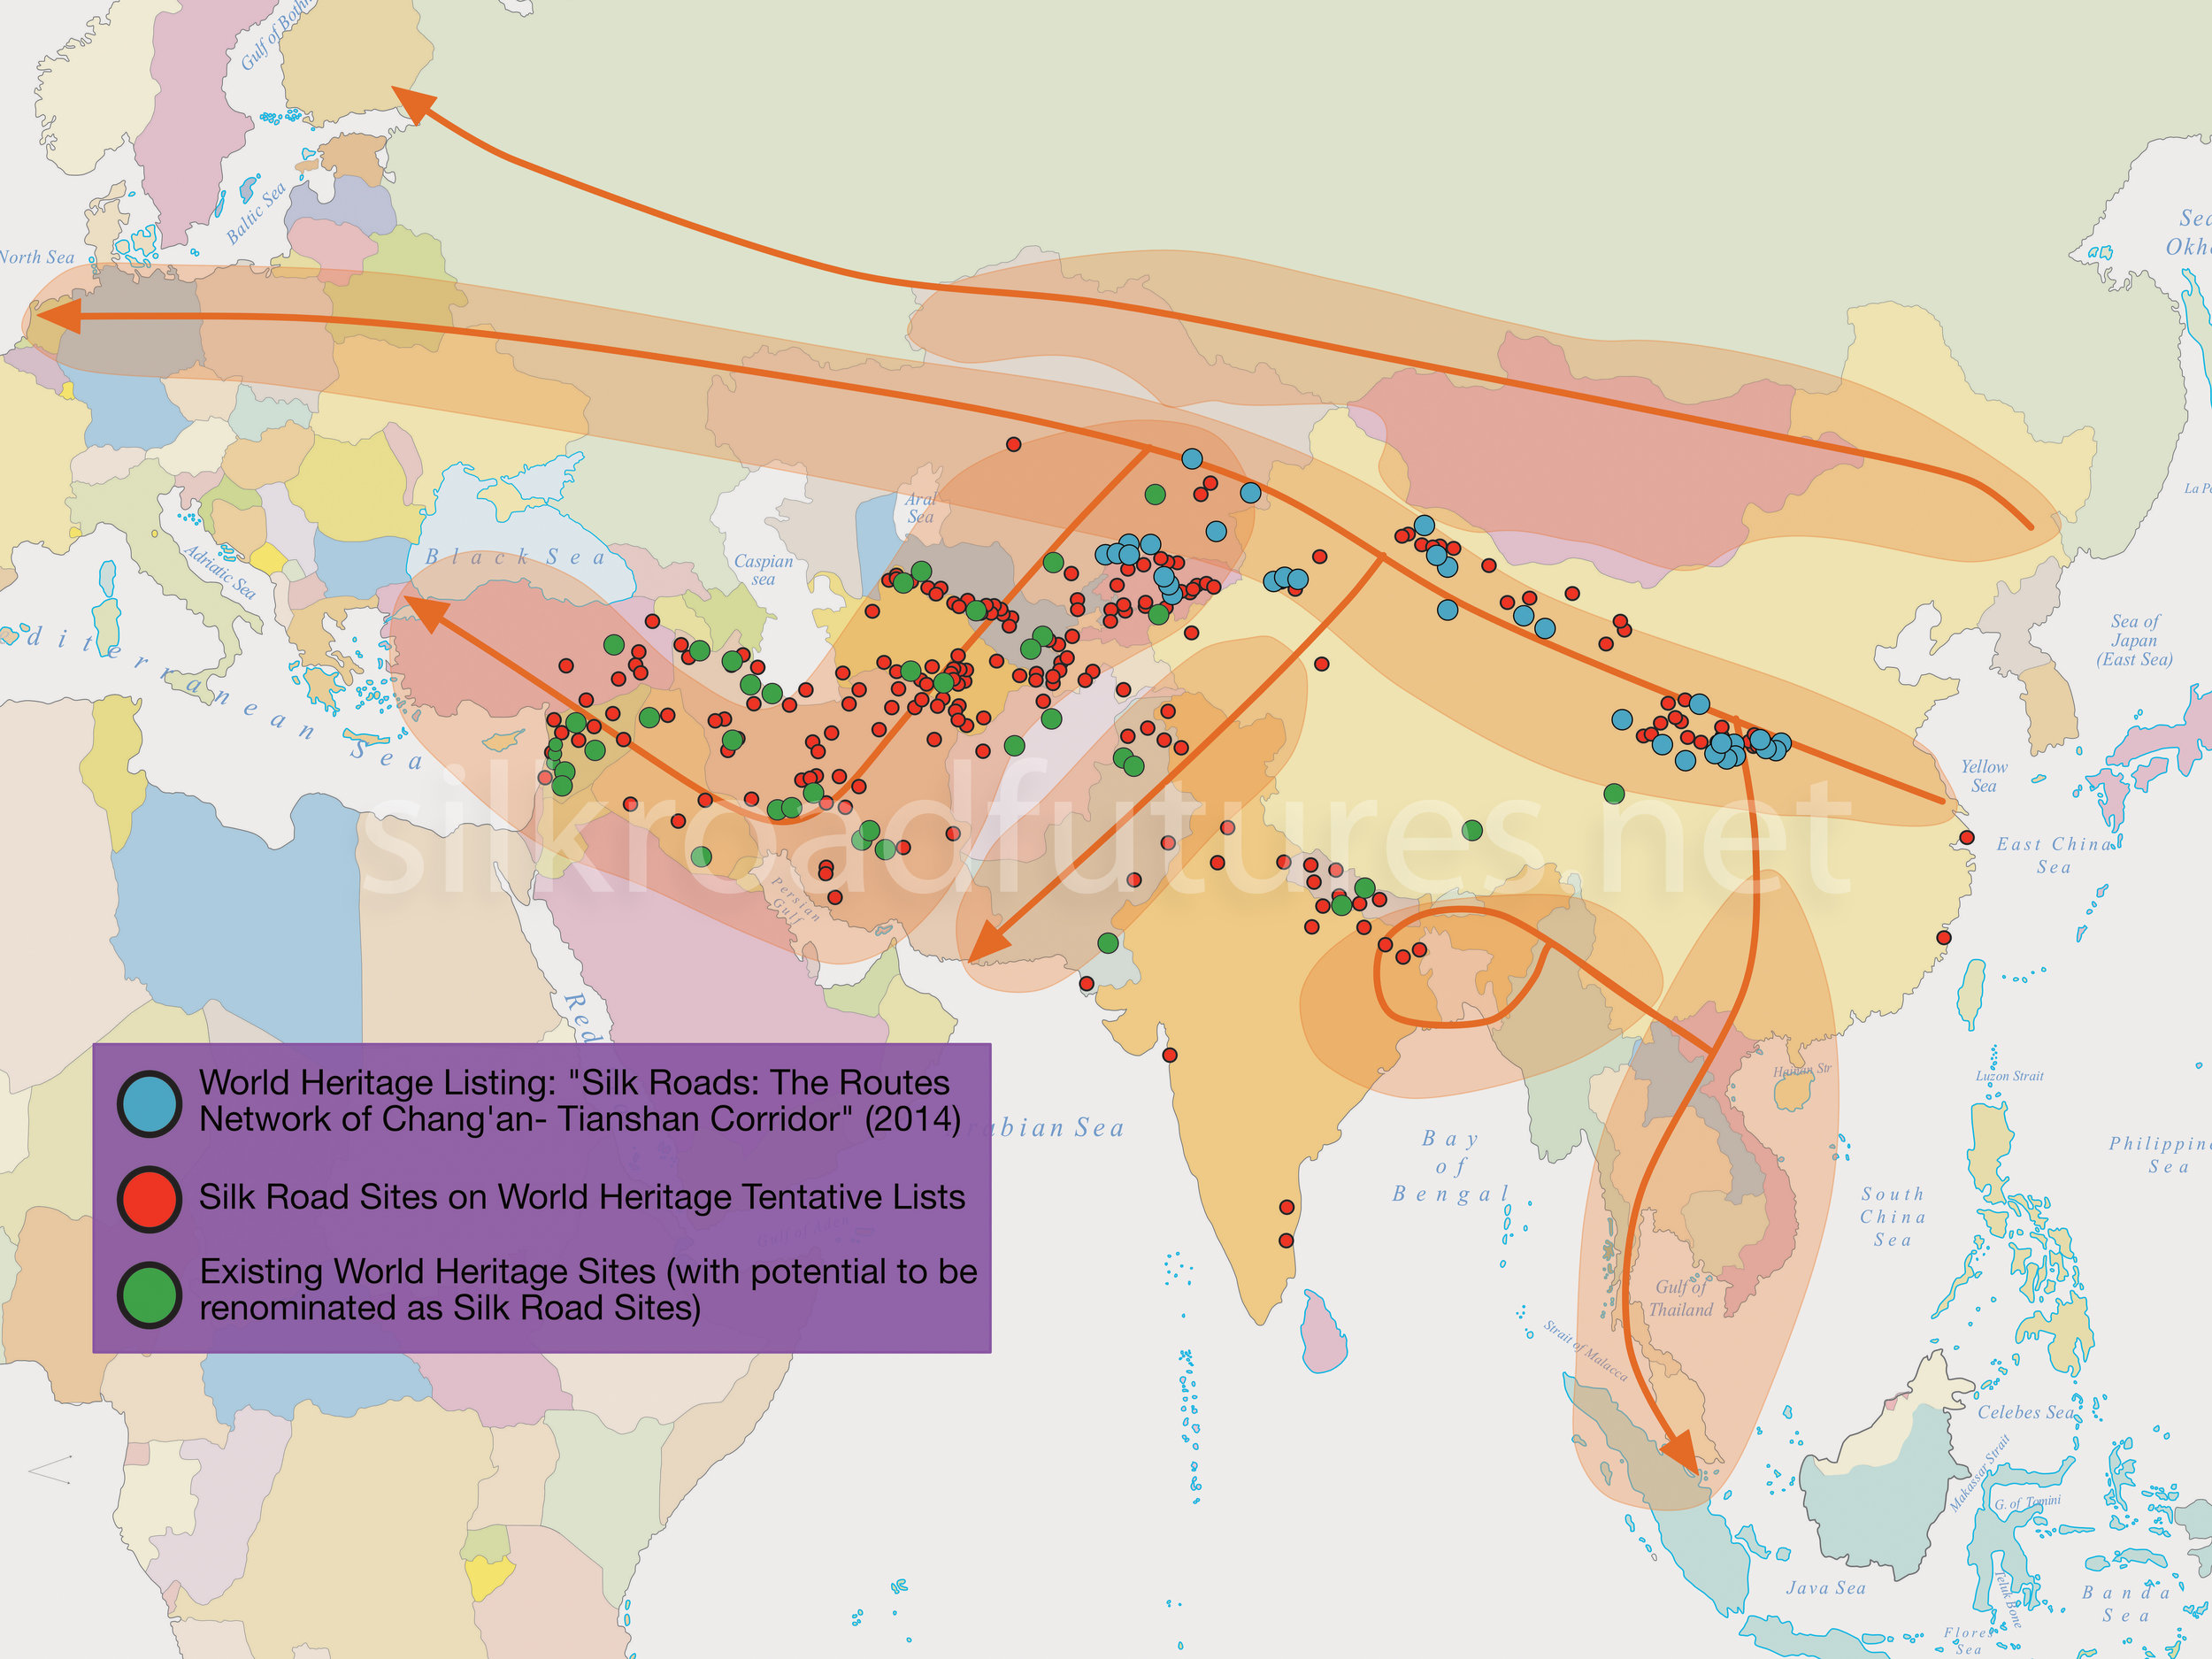 ECONOMIC - Silk Road Sites on WHS TLs and Existing WHS - ZOOMED IN - Cropped.jpg